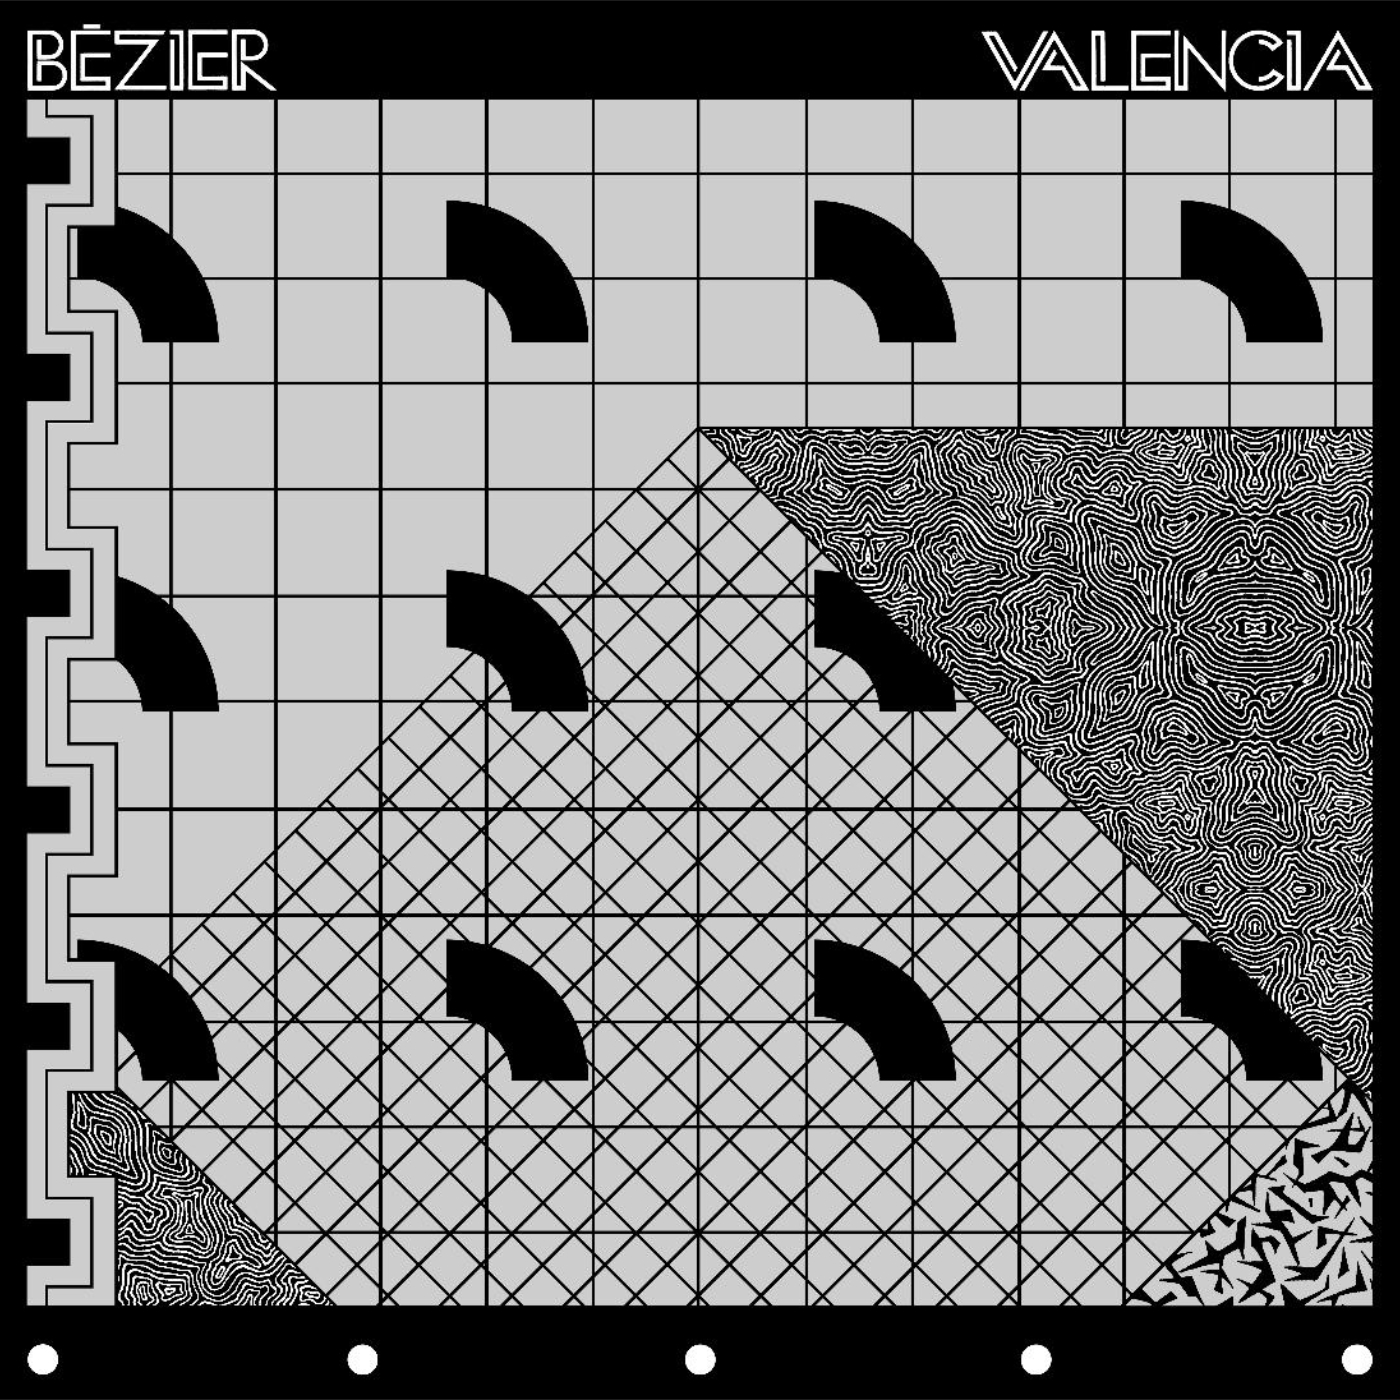 Image for the album cover of Bézier's Valencia on Dark Entries Records out February 2022 